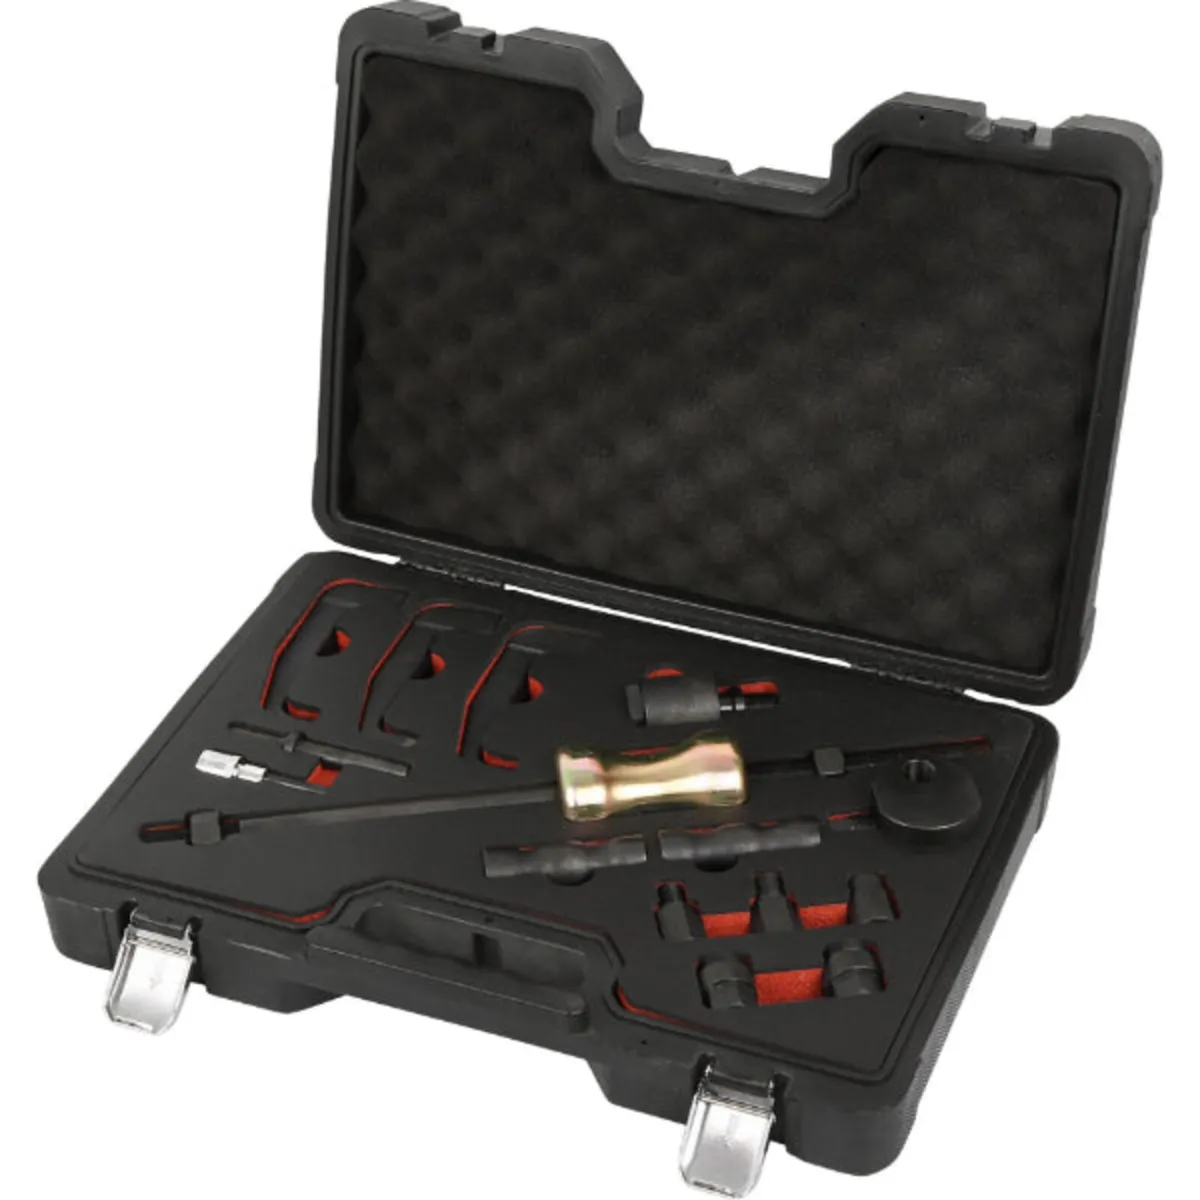 INJECTOR REMOVAL TOOL KIT FOR USE WITH AIR HAMMER